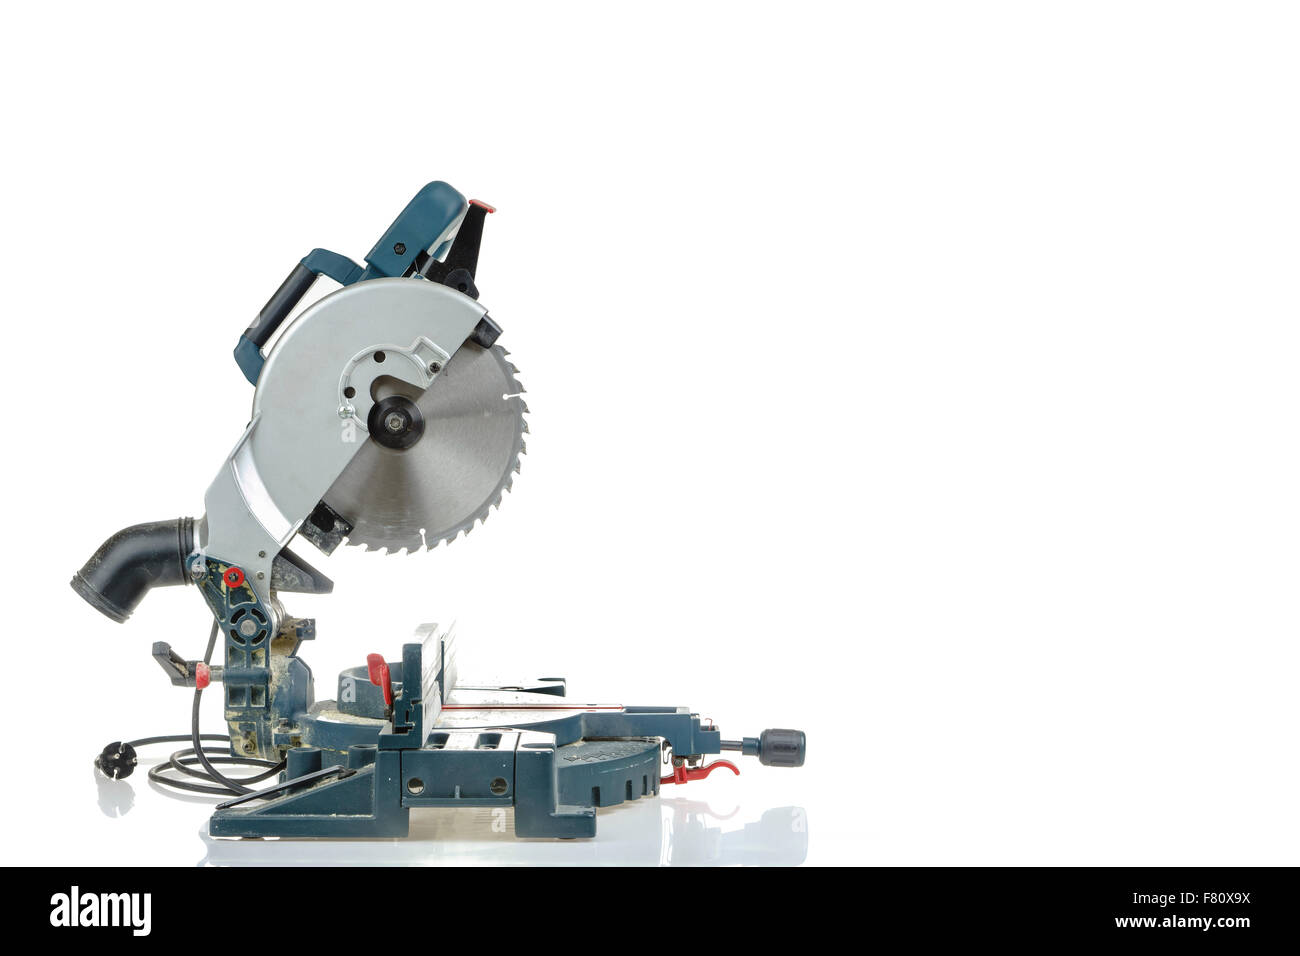 Mitre saw side view isolated on white Stock Photo